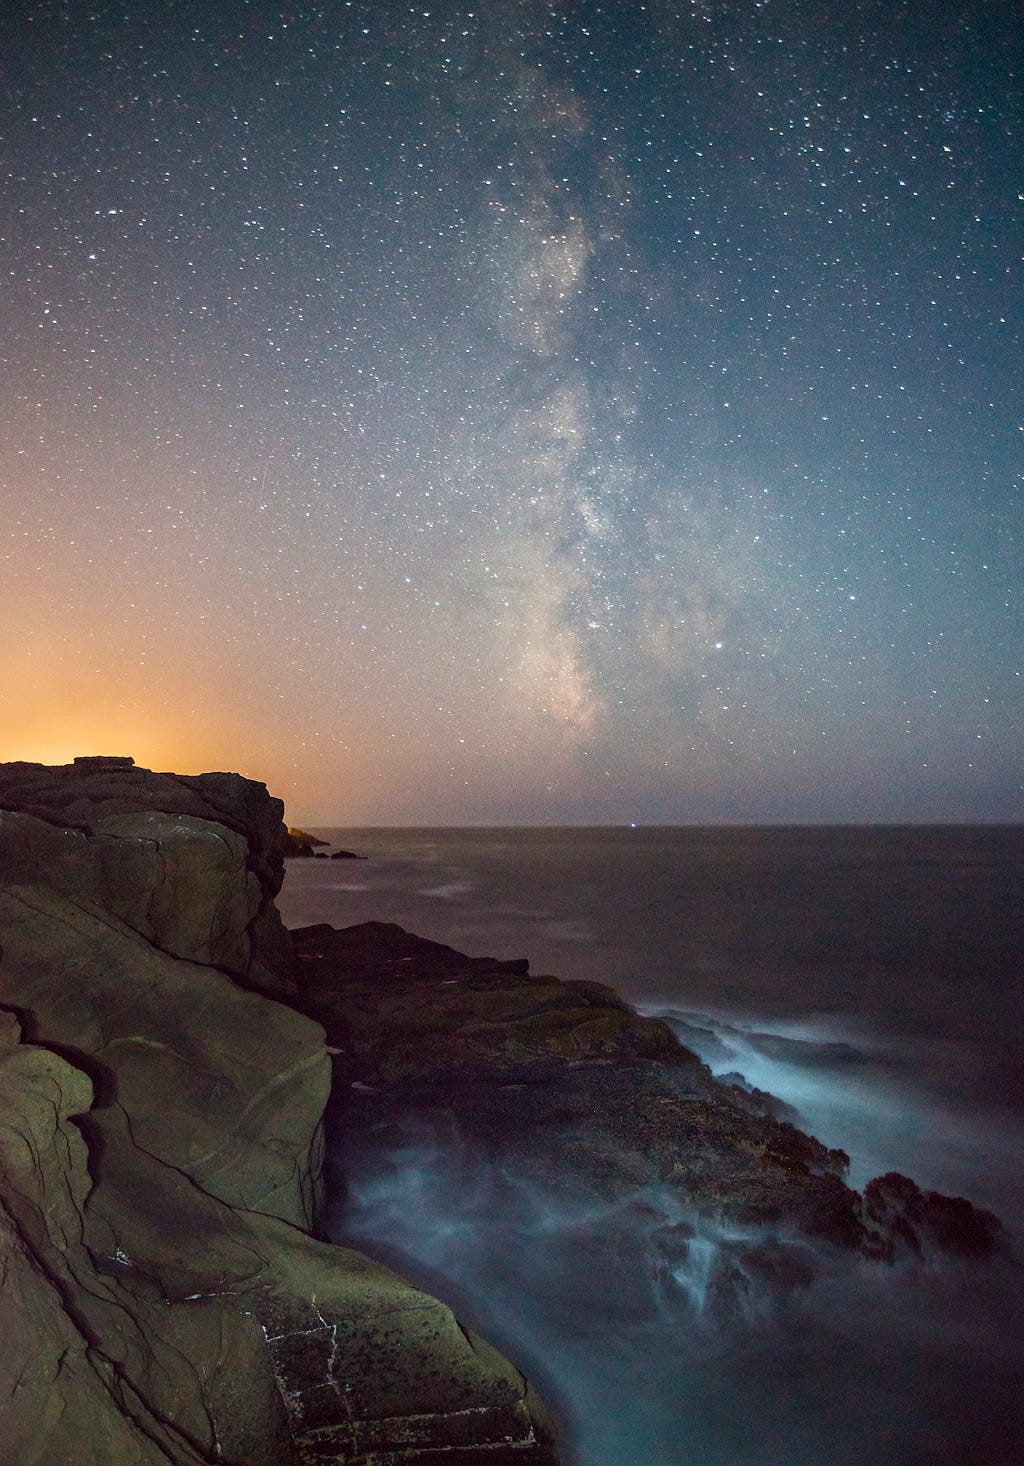 A night image of the Milky Way over the ocean and cliffs.